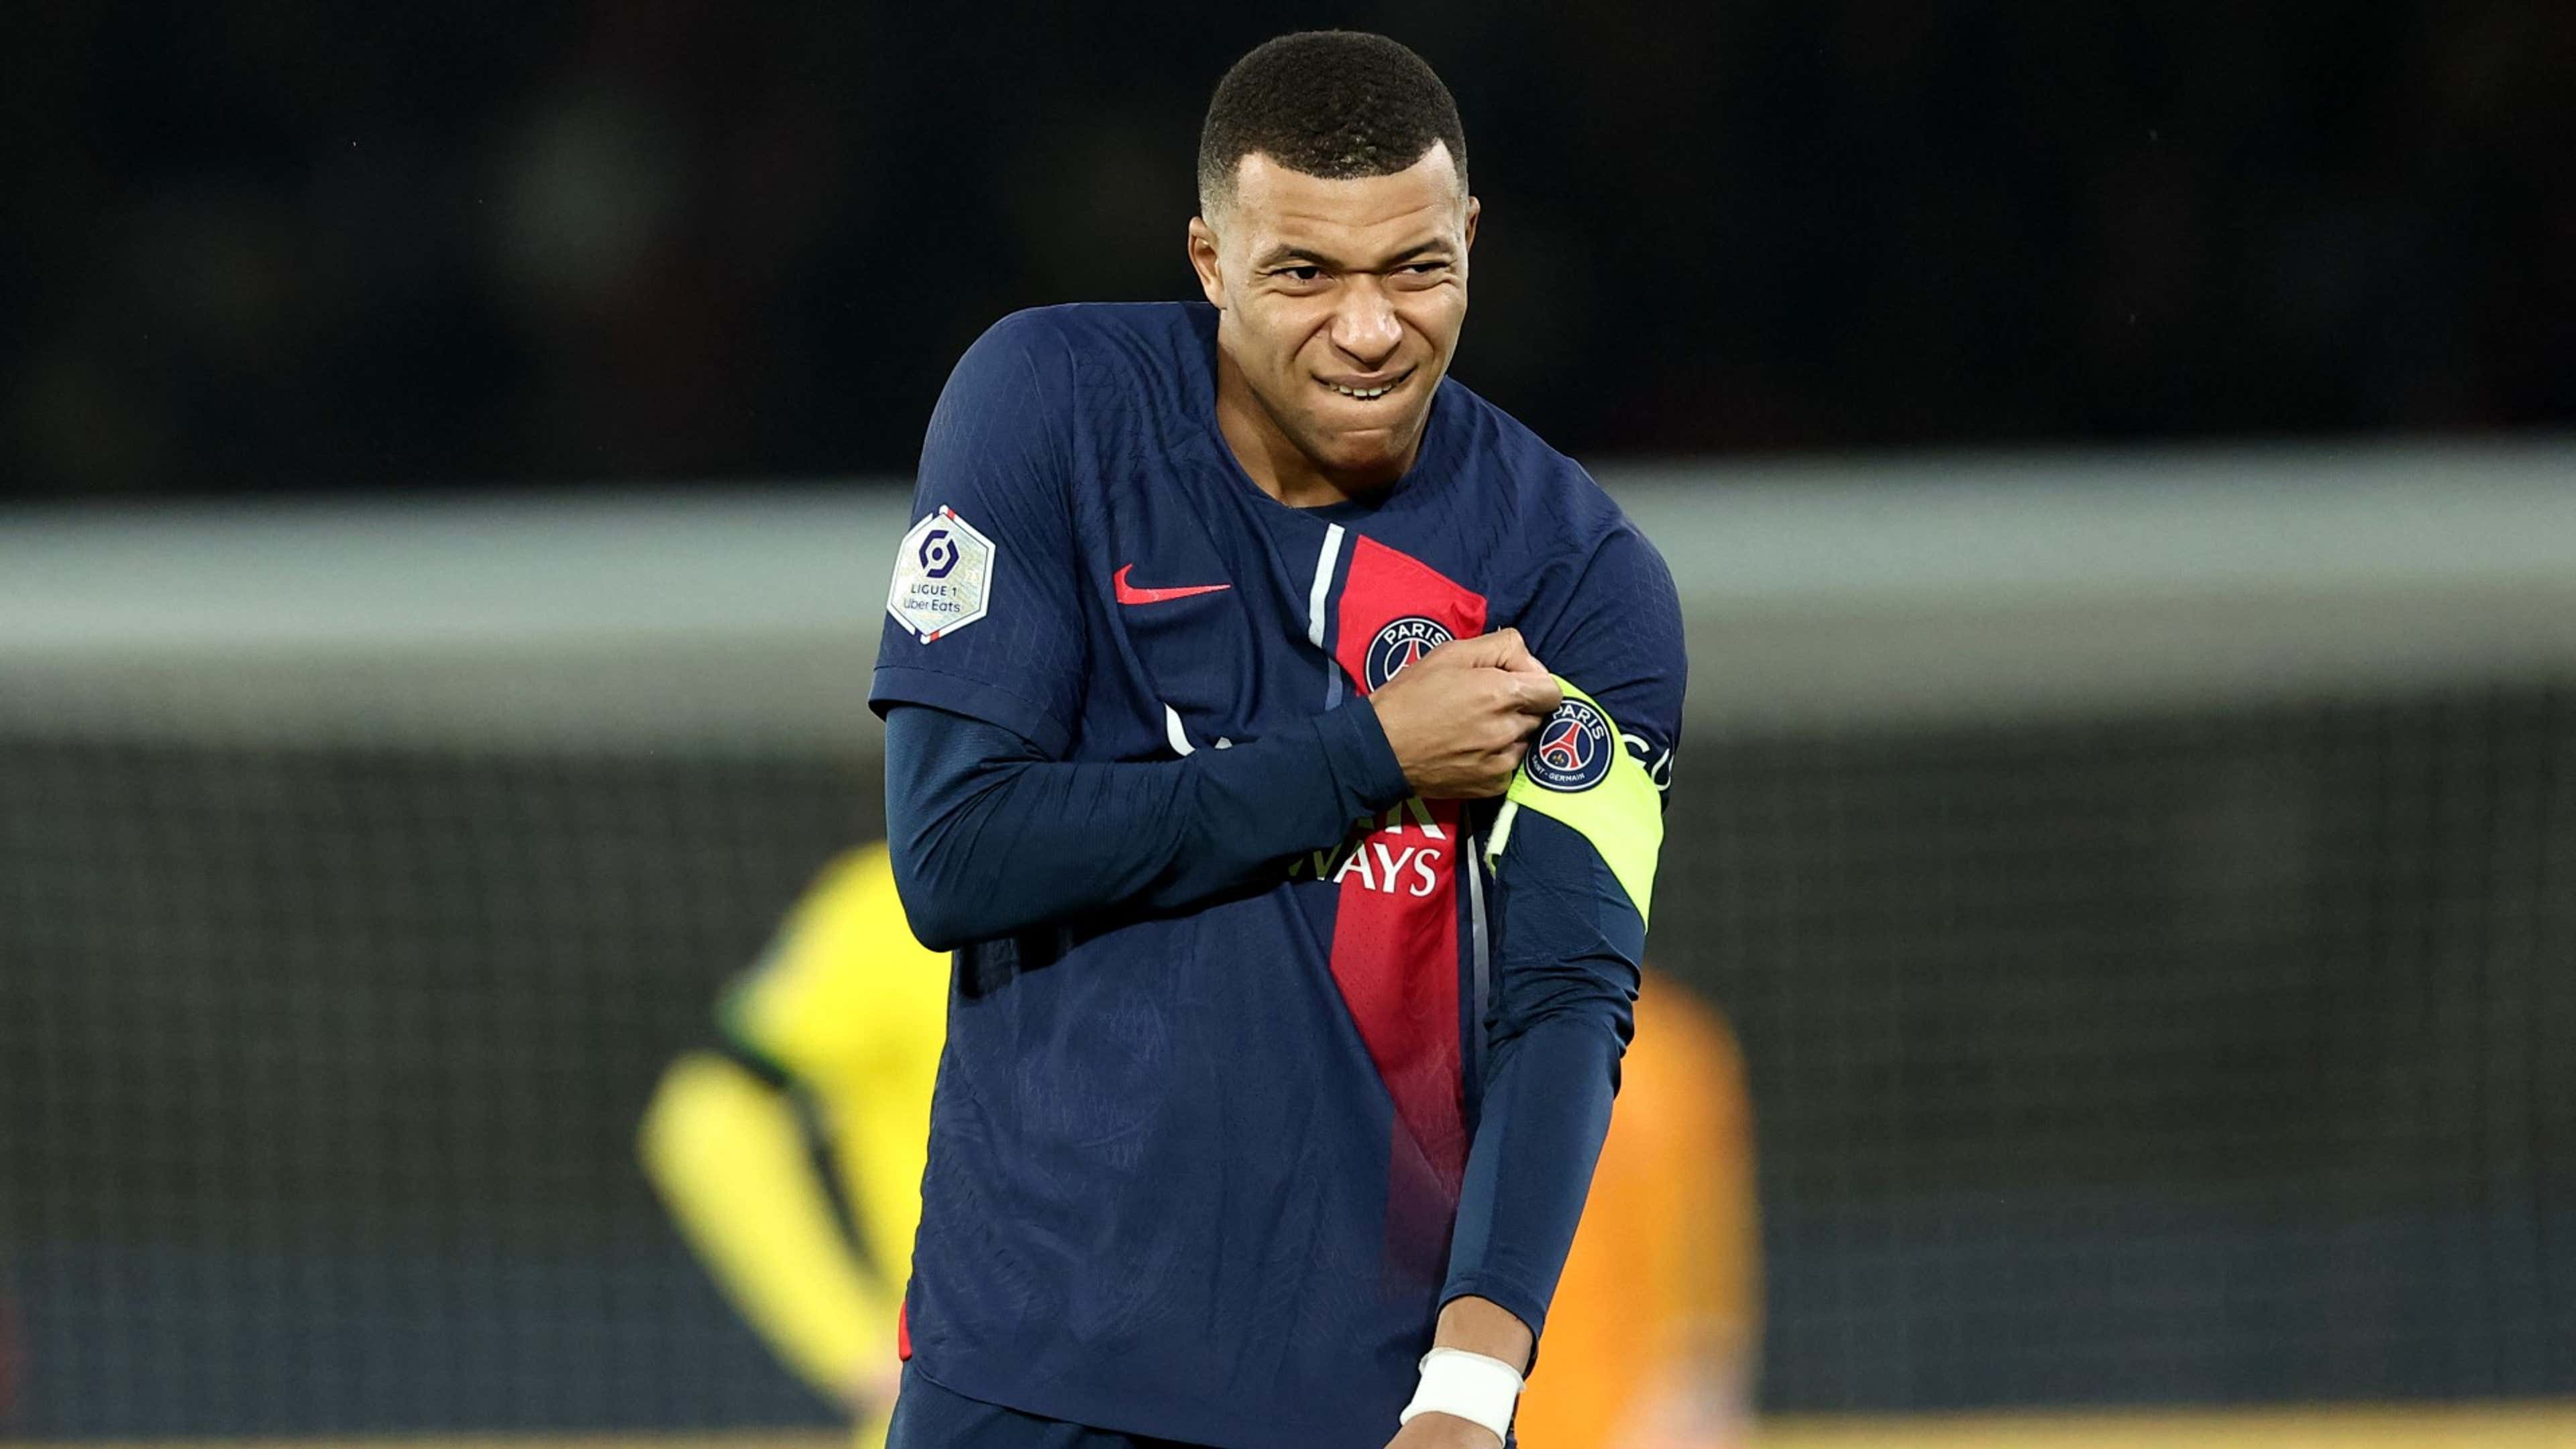 The final embarrassment? PSG put their faith in Kylian Mbappe to save their Champions League skin | Goal.com